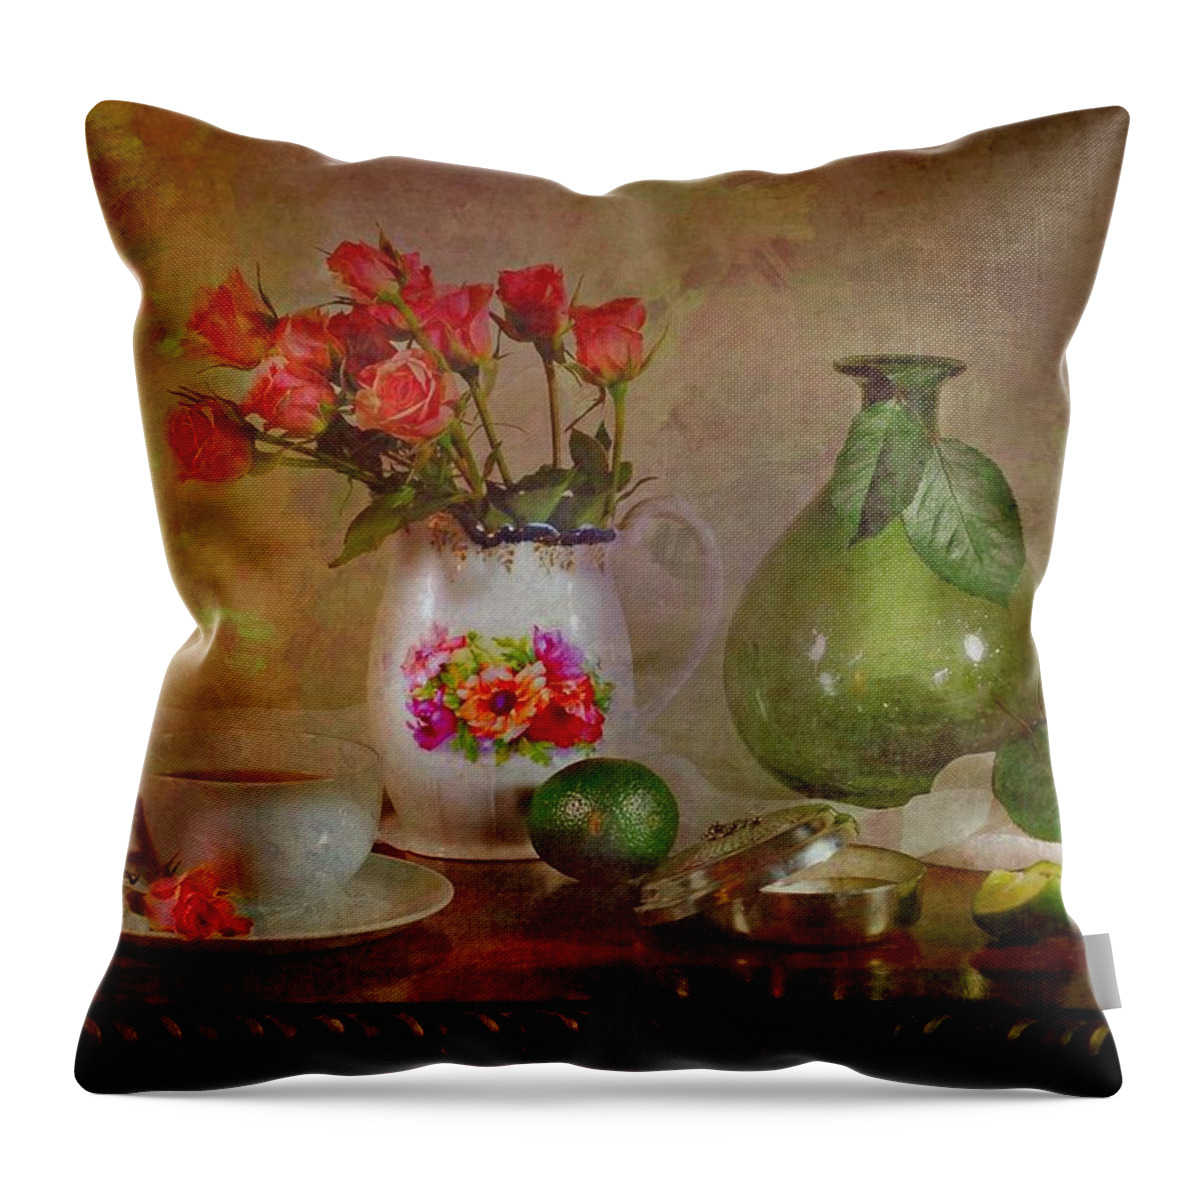 The Elegant Lady Throw Pillow featuring the photograph The Elegant Lady by Diana Angstadt